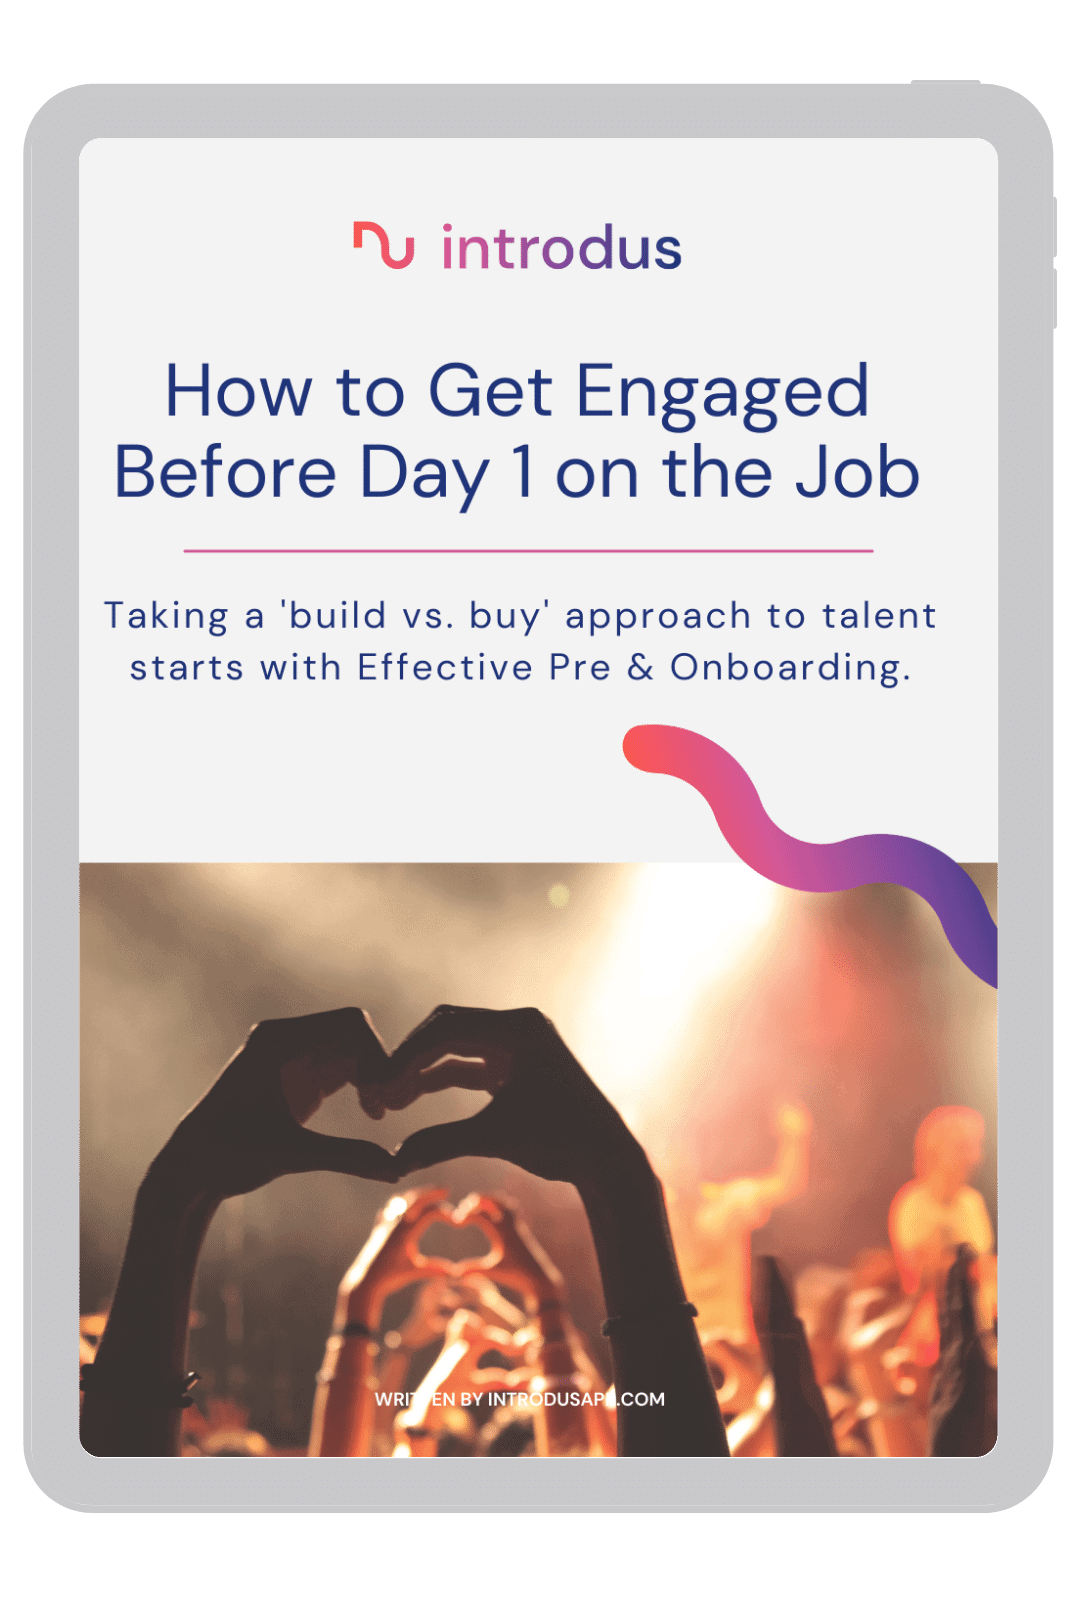 How to Get Engaged Before Day 1 on the Job